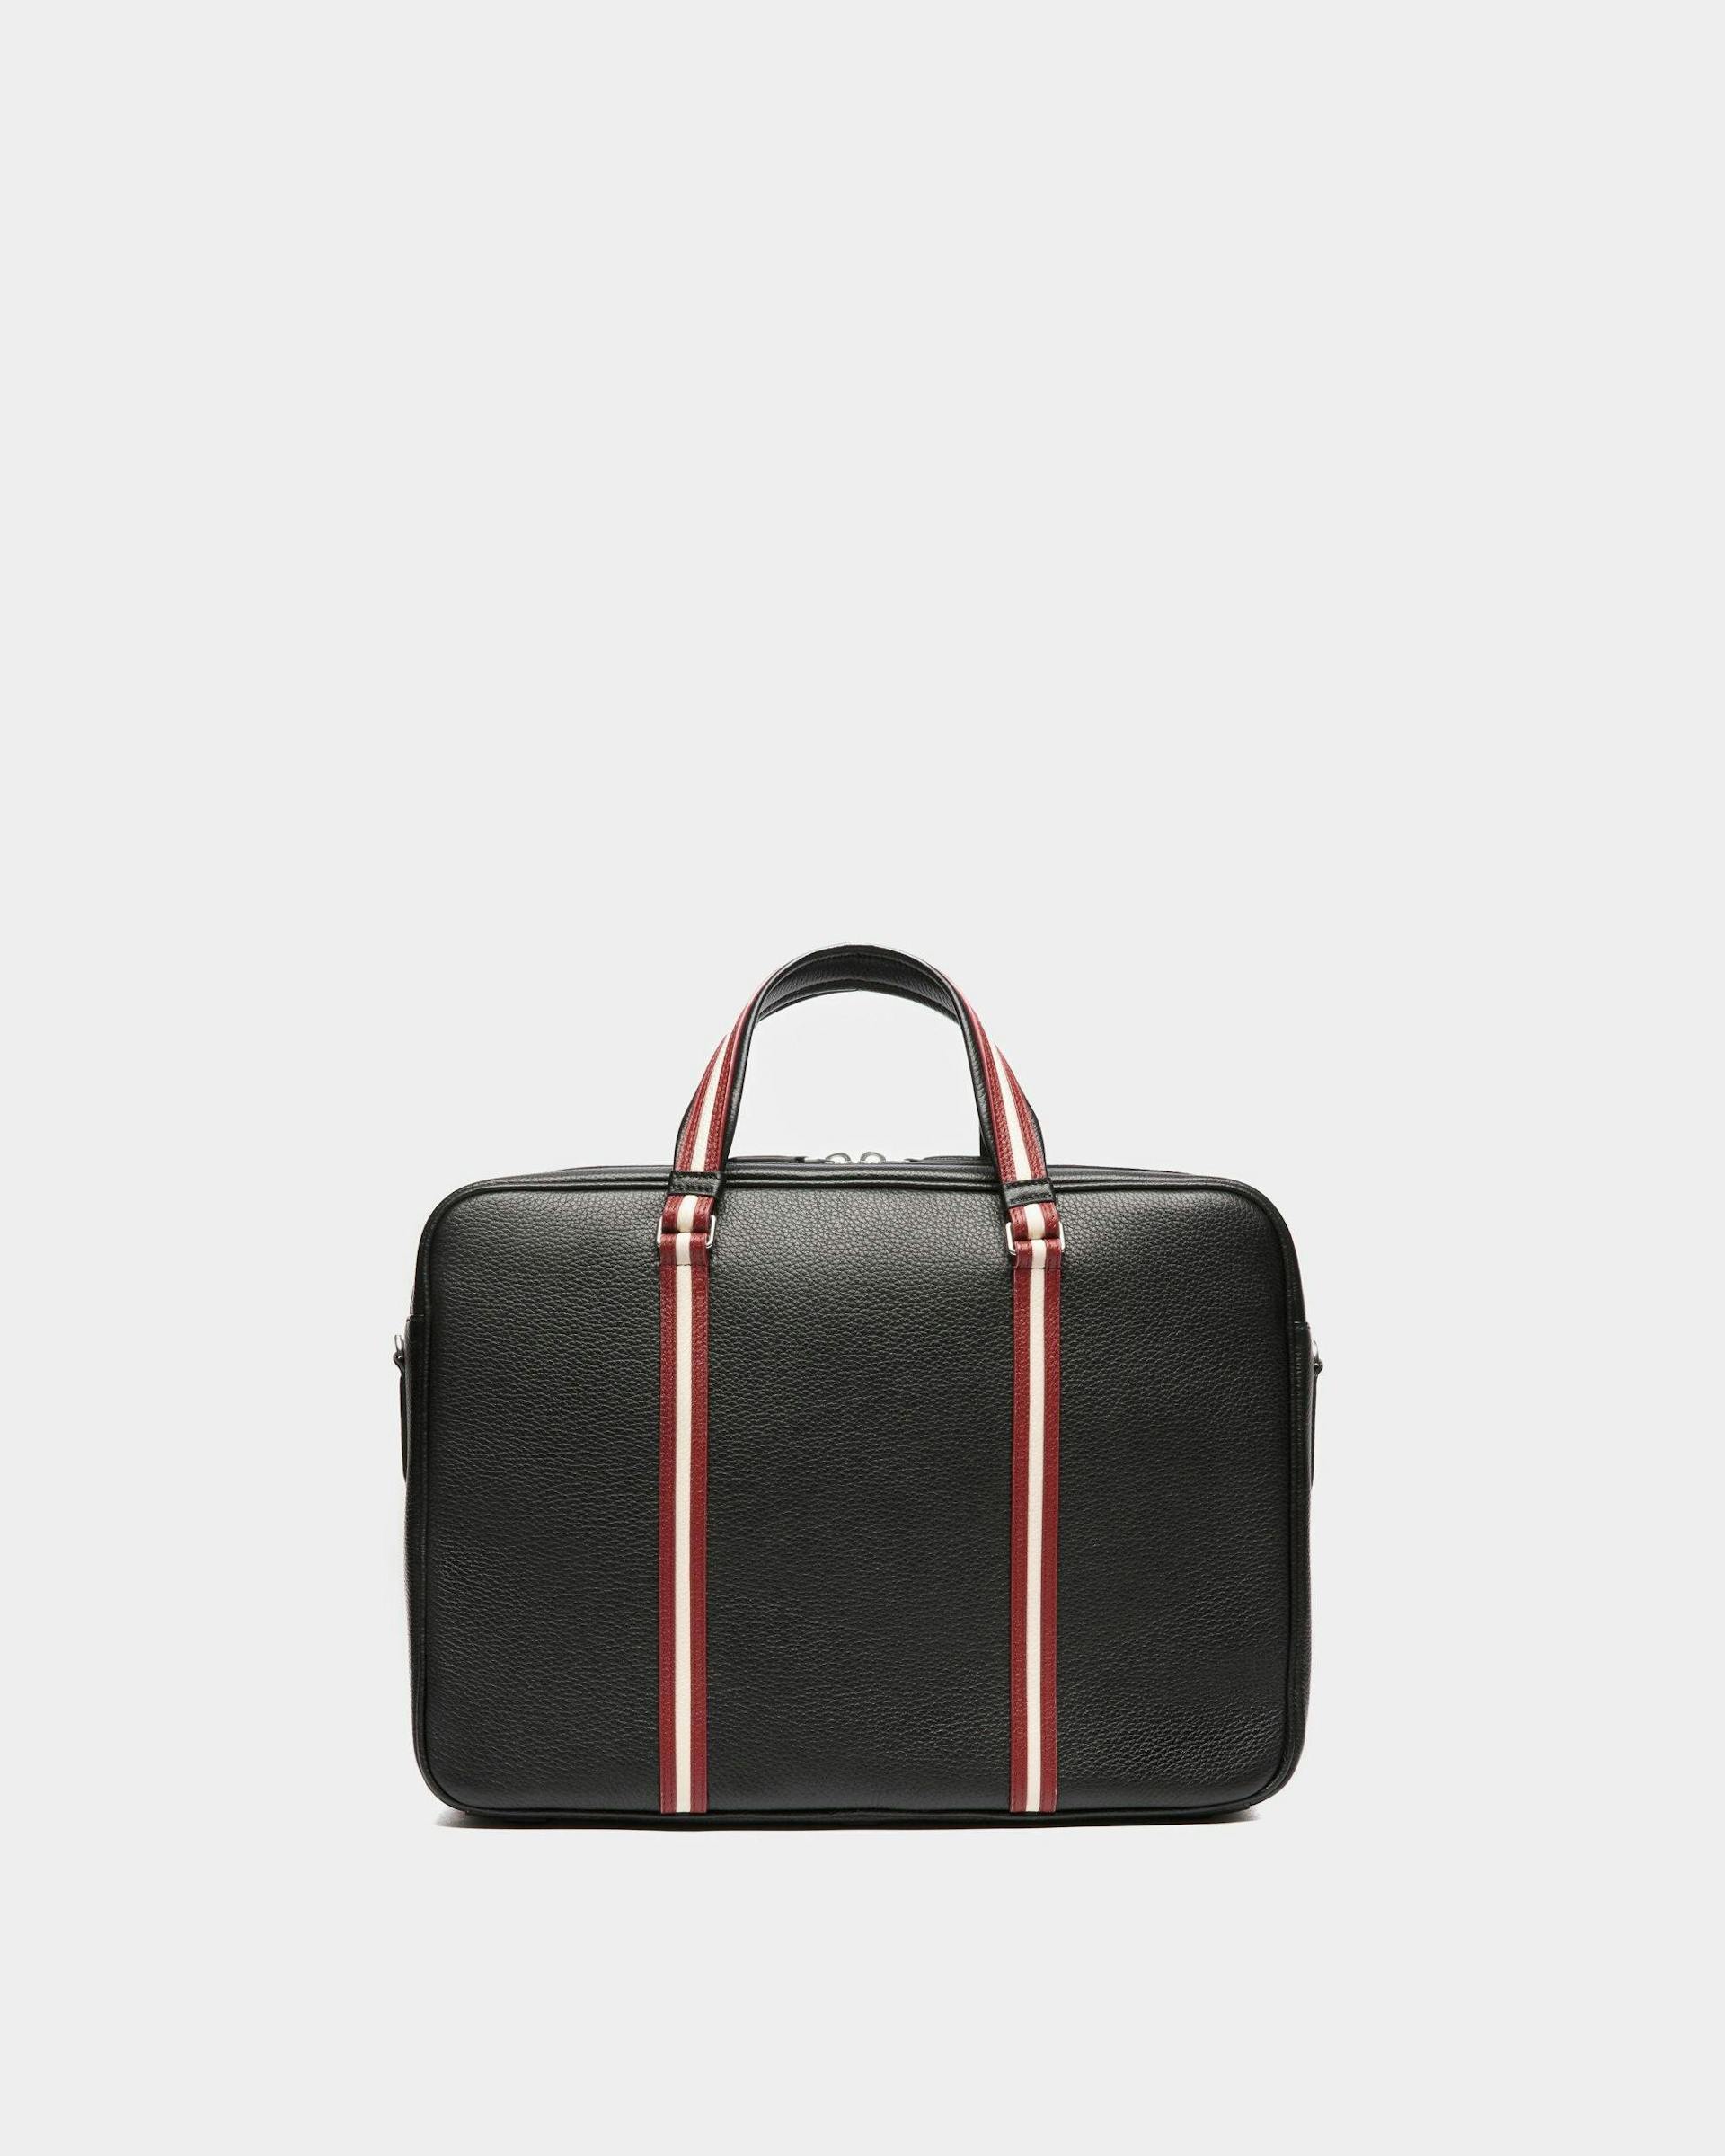 Men's Code Briefcase In Black Grained Leather | Bally | Still Life Back